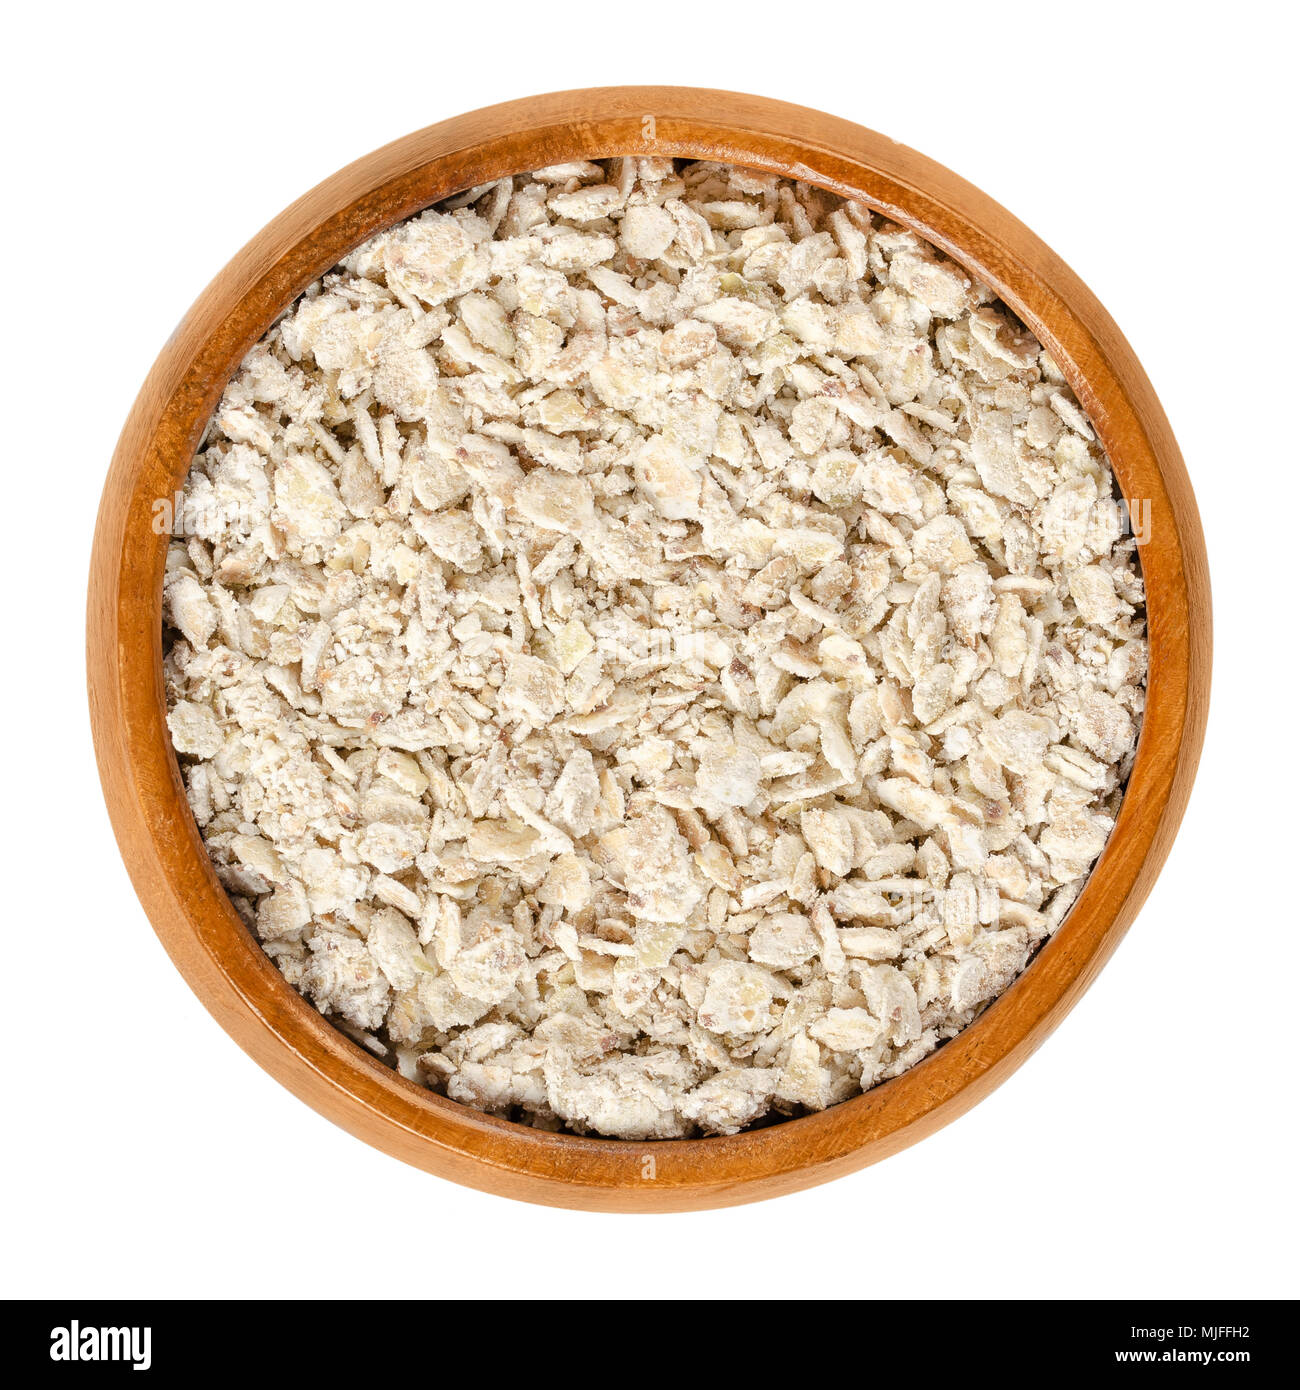 Buckwheat flakes in wooden bowl. Rolled coarse wholegrain cereal. Wheat and gluten free. Edible and raw food. Fagopyrum esculentum. Stock Photo